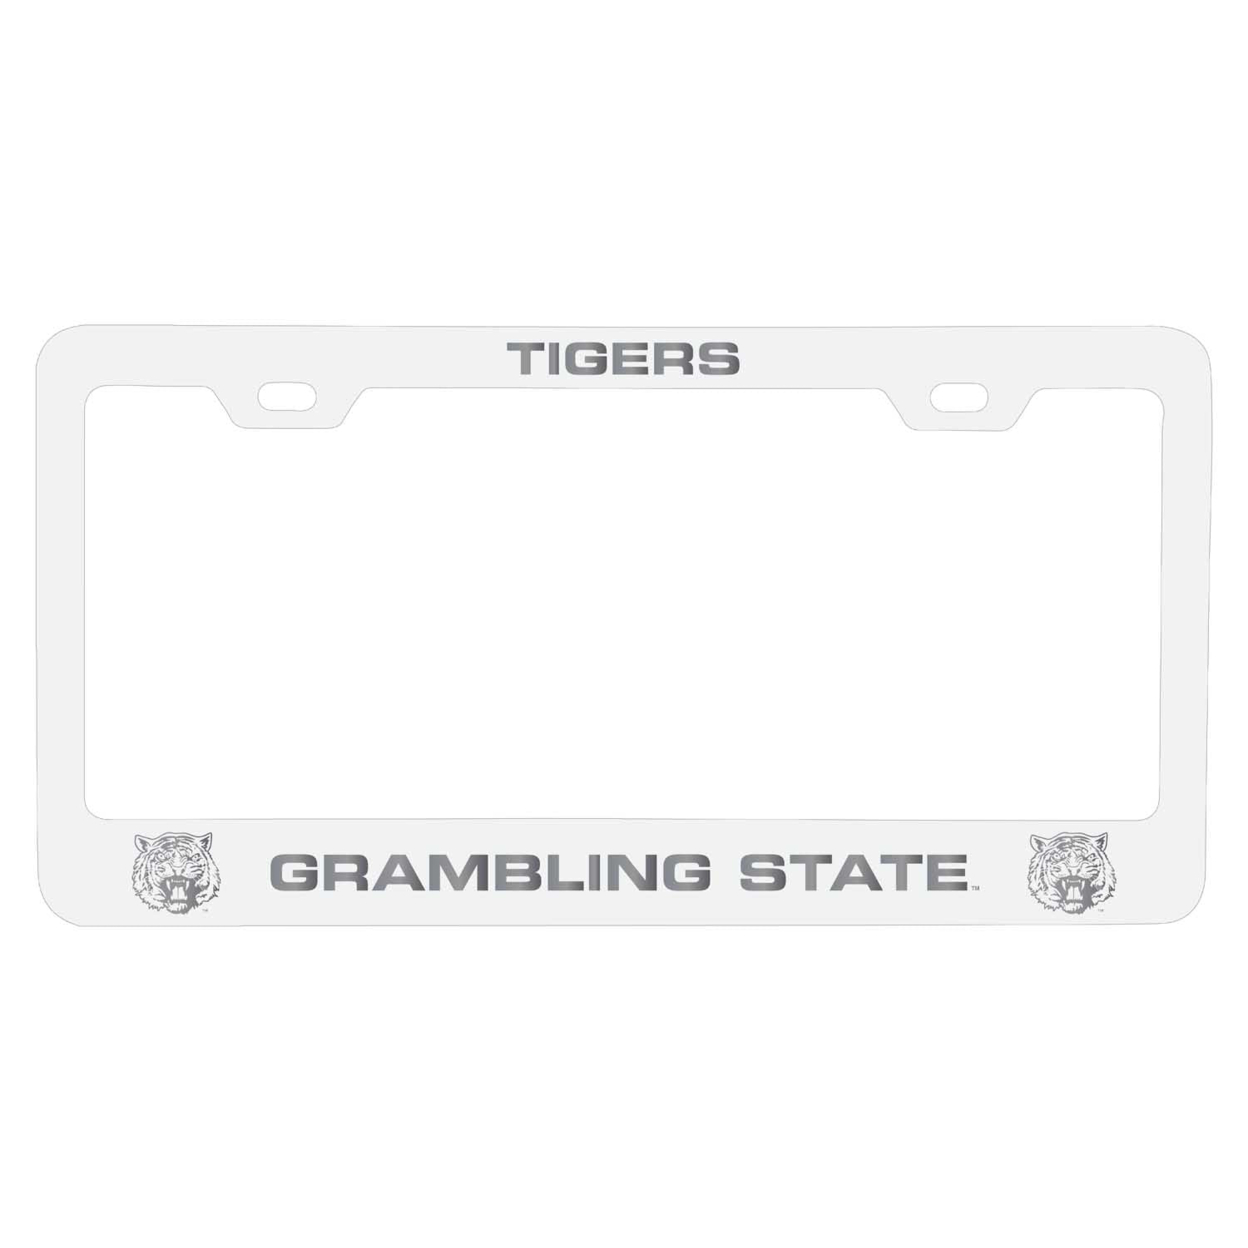 Grambling State Tigers Etched Metal License Plate Frame Choose Your Color